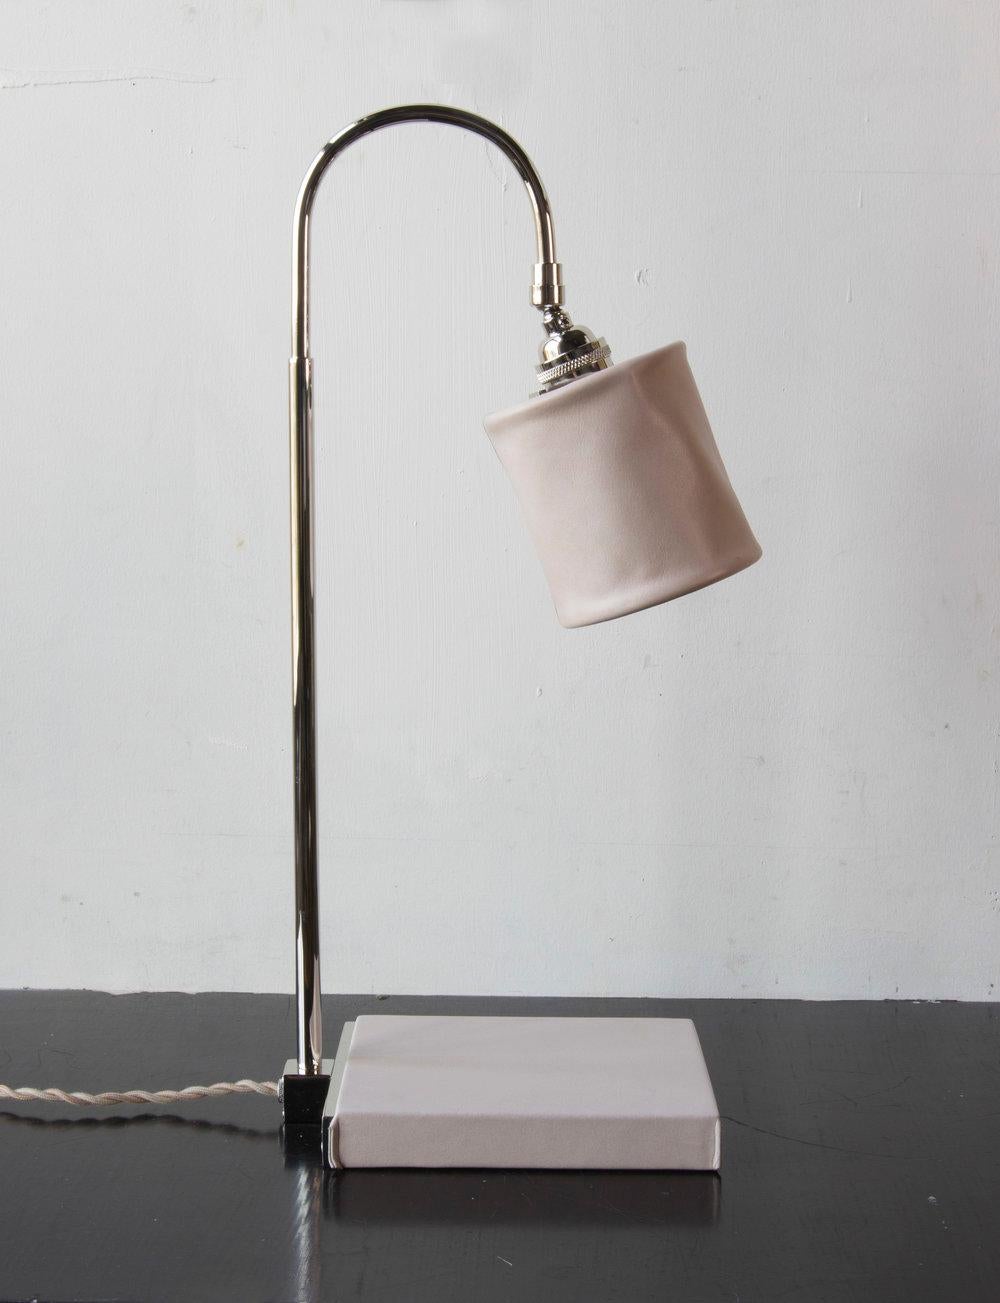 Series01 Desk Lamp, Hand-Dyed Ash 'Gray' Leather, Polished Unlacquered Brass For Sale 8